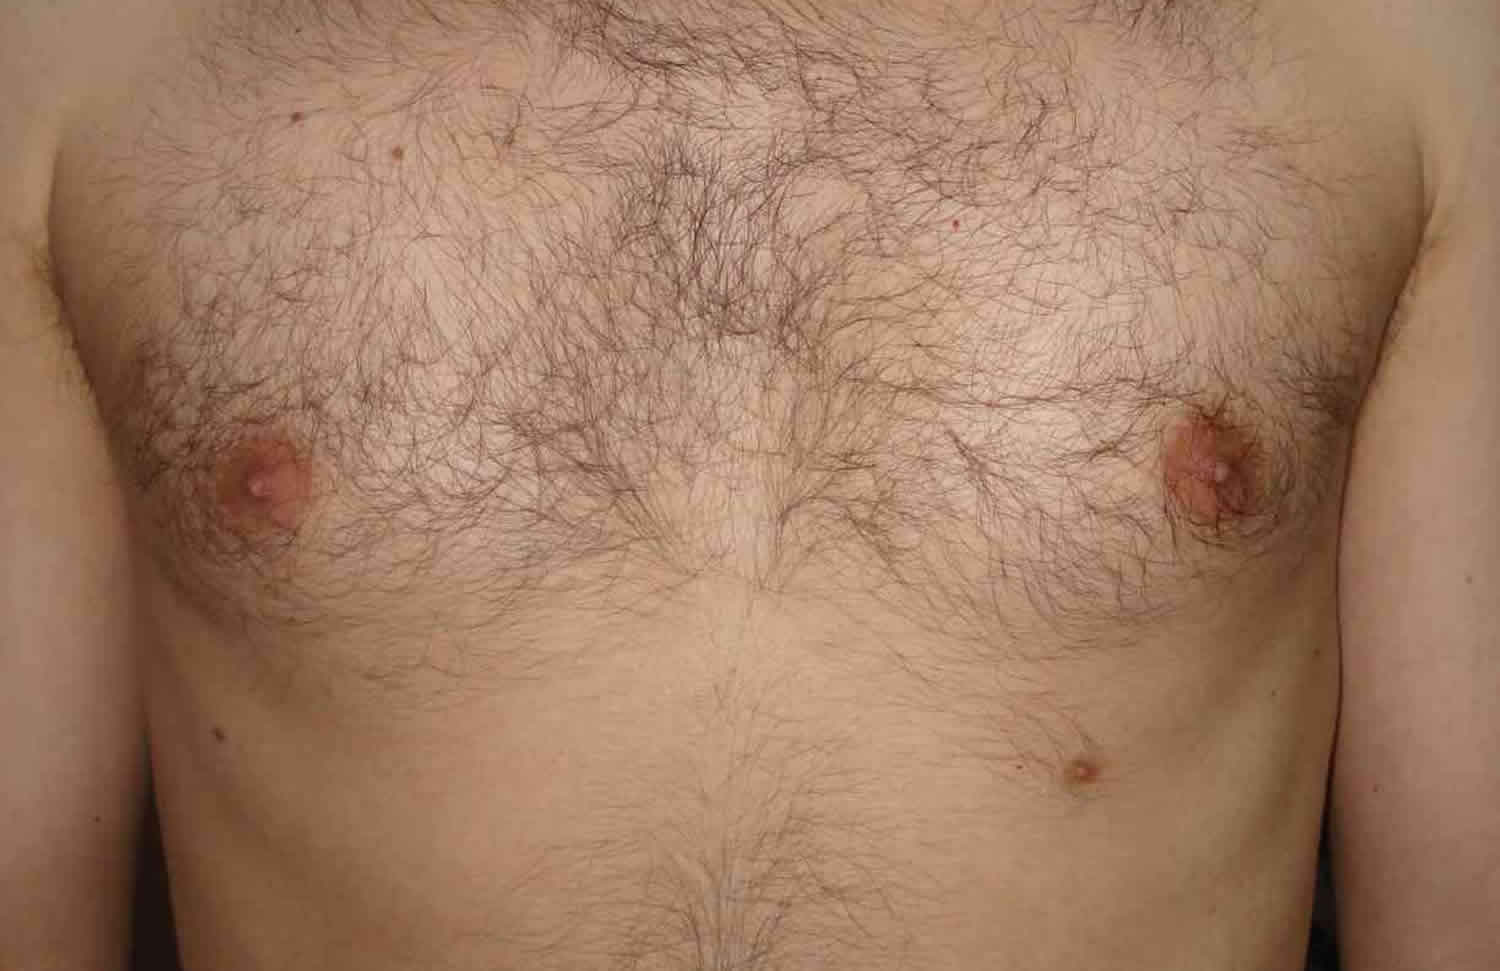 Supernumerary nipple causes, clinical features, diagnosis & treatment